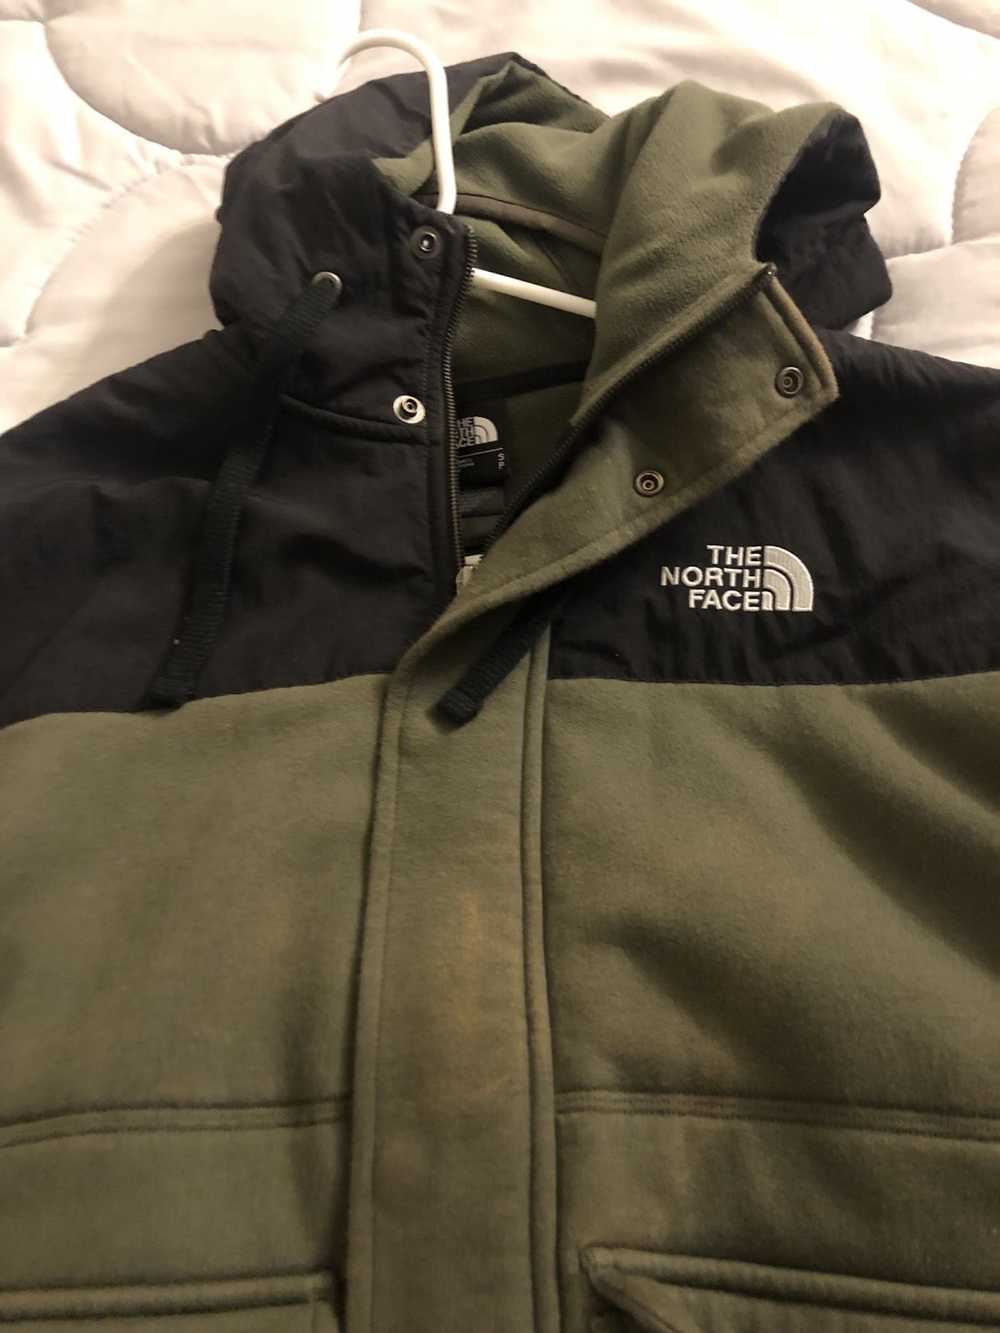 The North Face North face zip up jacket - image 2